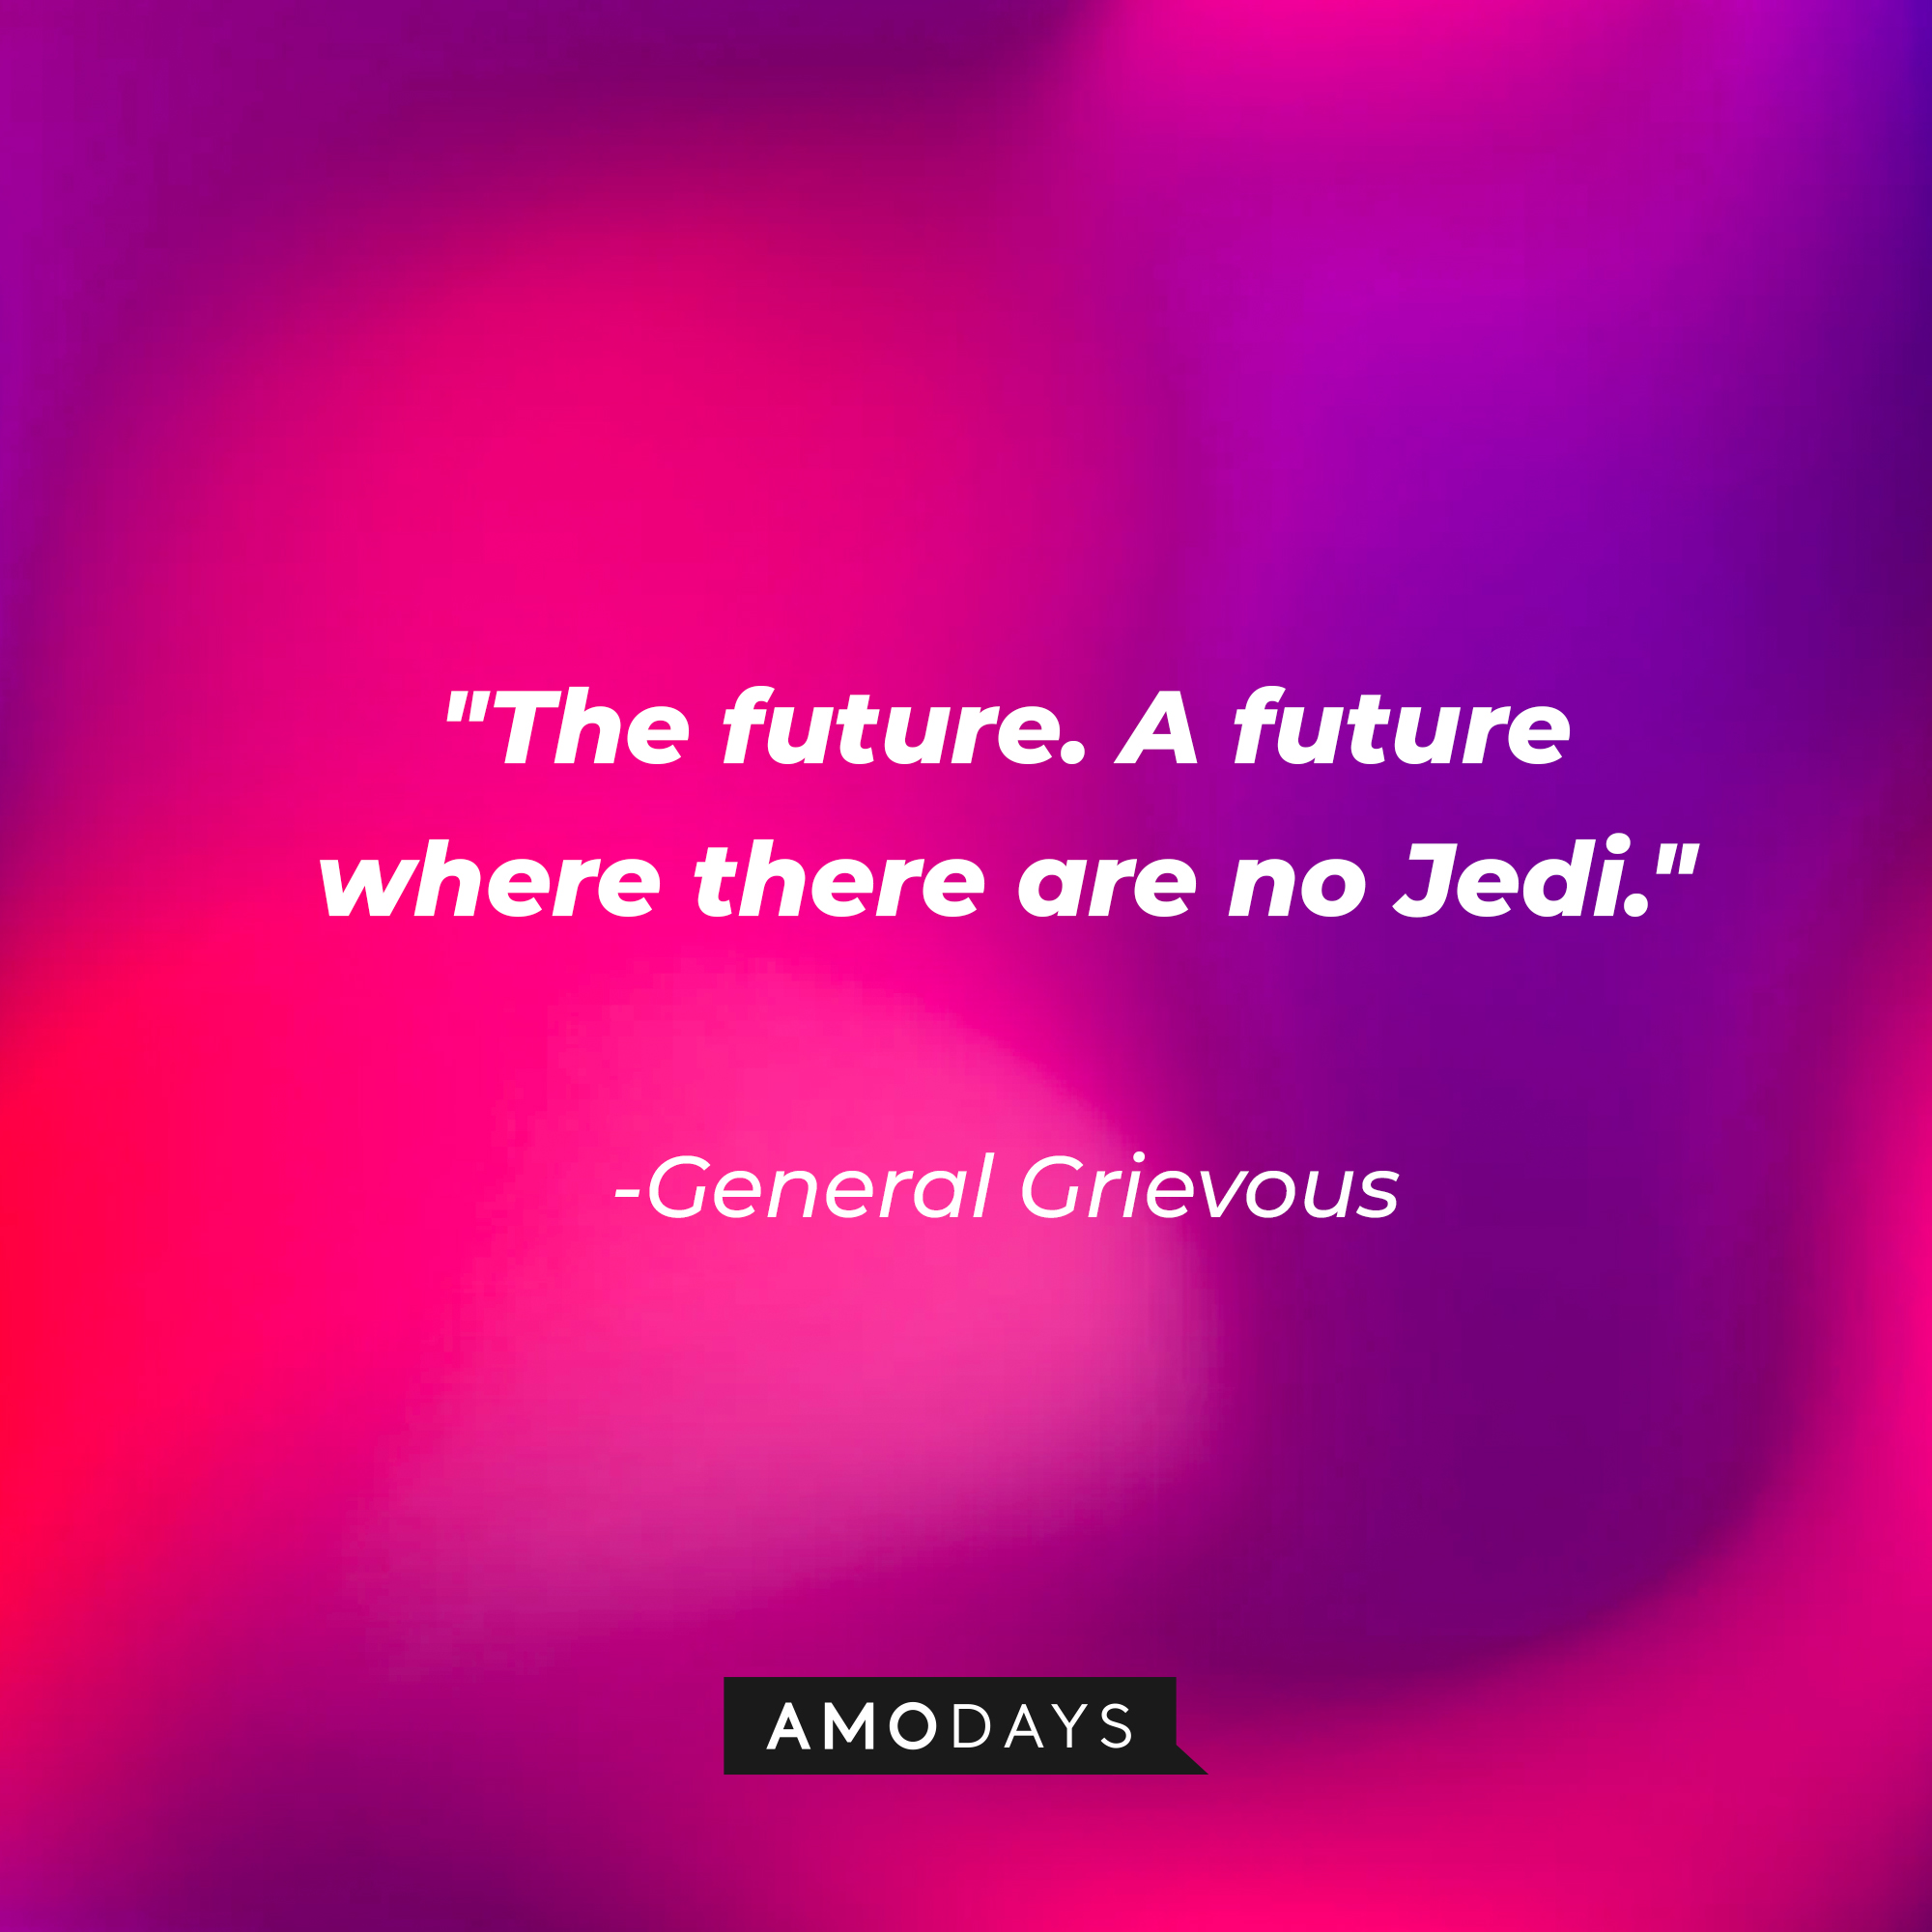 General Grievous' quote: "The future. A future where there are no Jedi." | Source: AmoDays